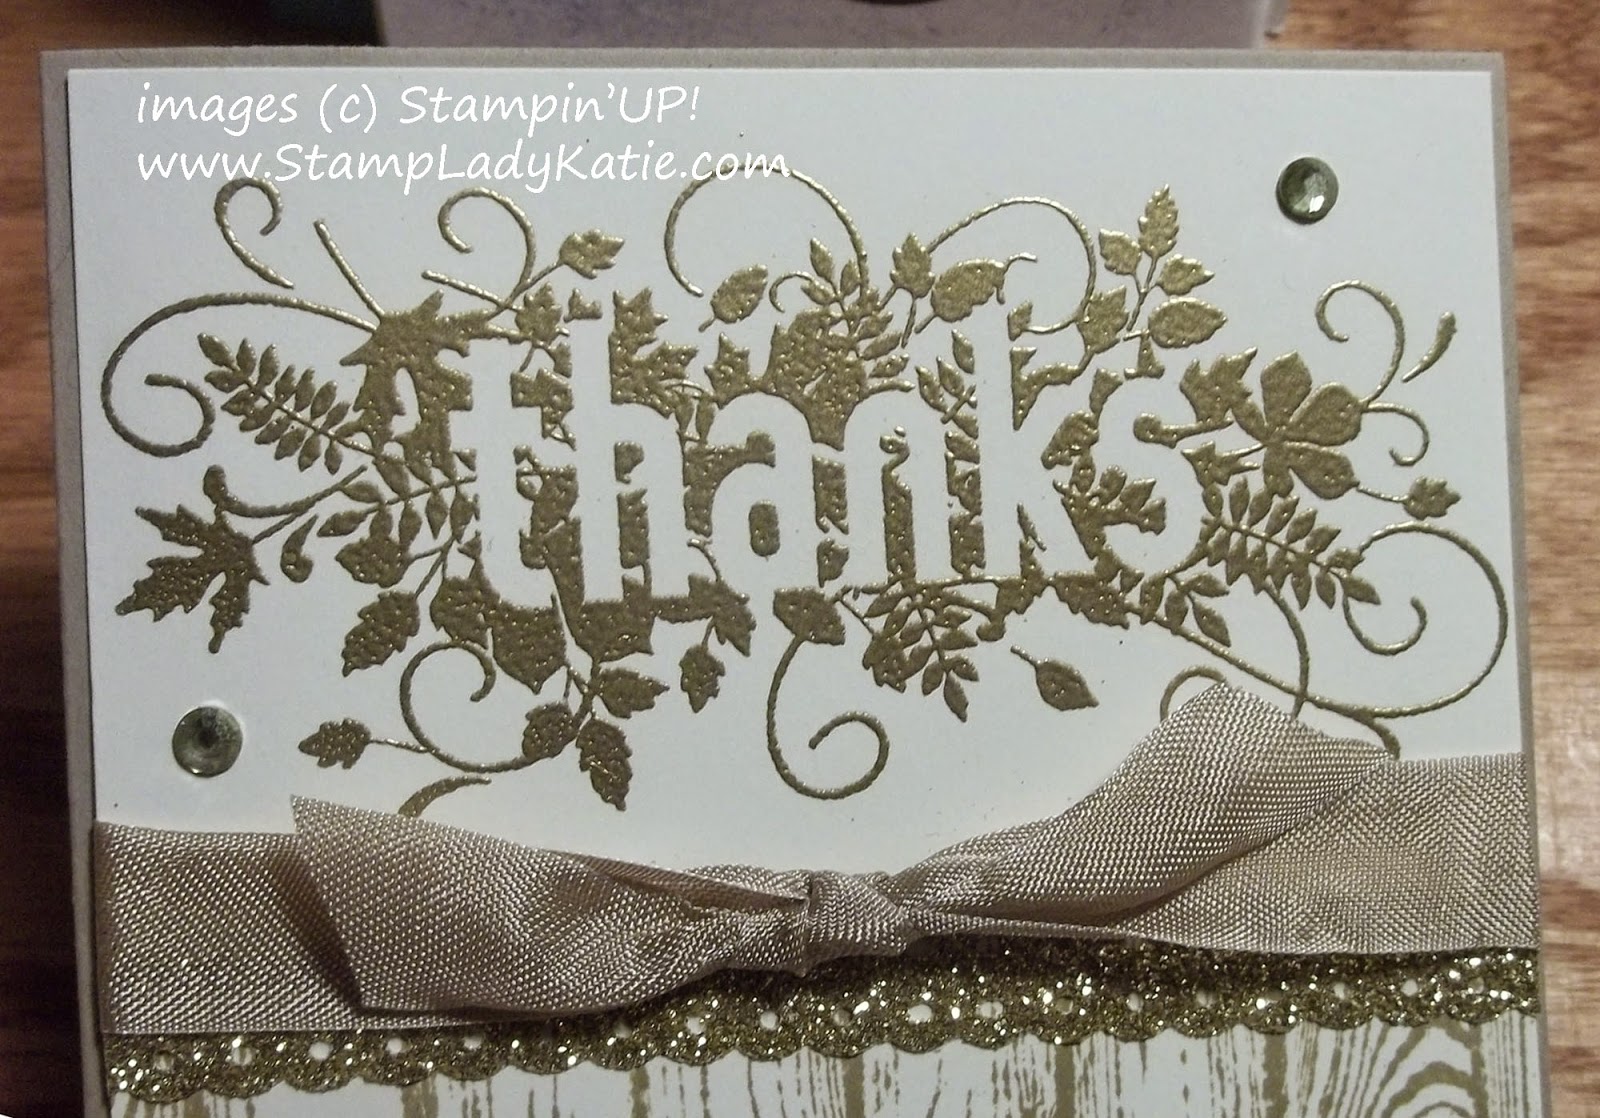 Gold embossed image from Stampin'UP!'s Seasonally Scattered stamp set.